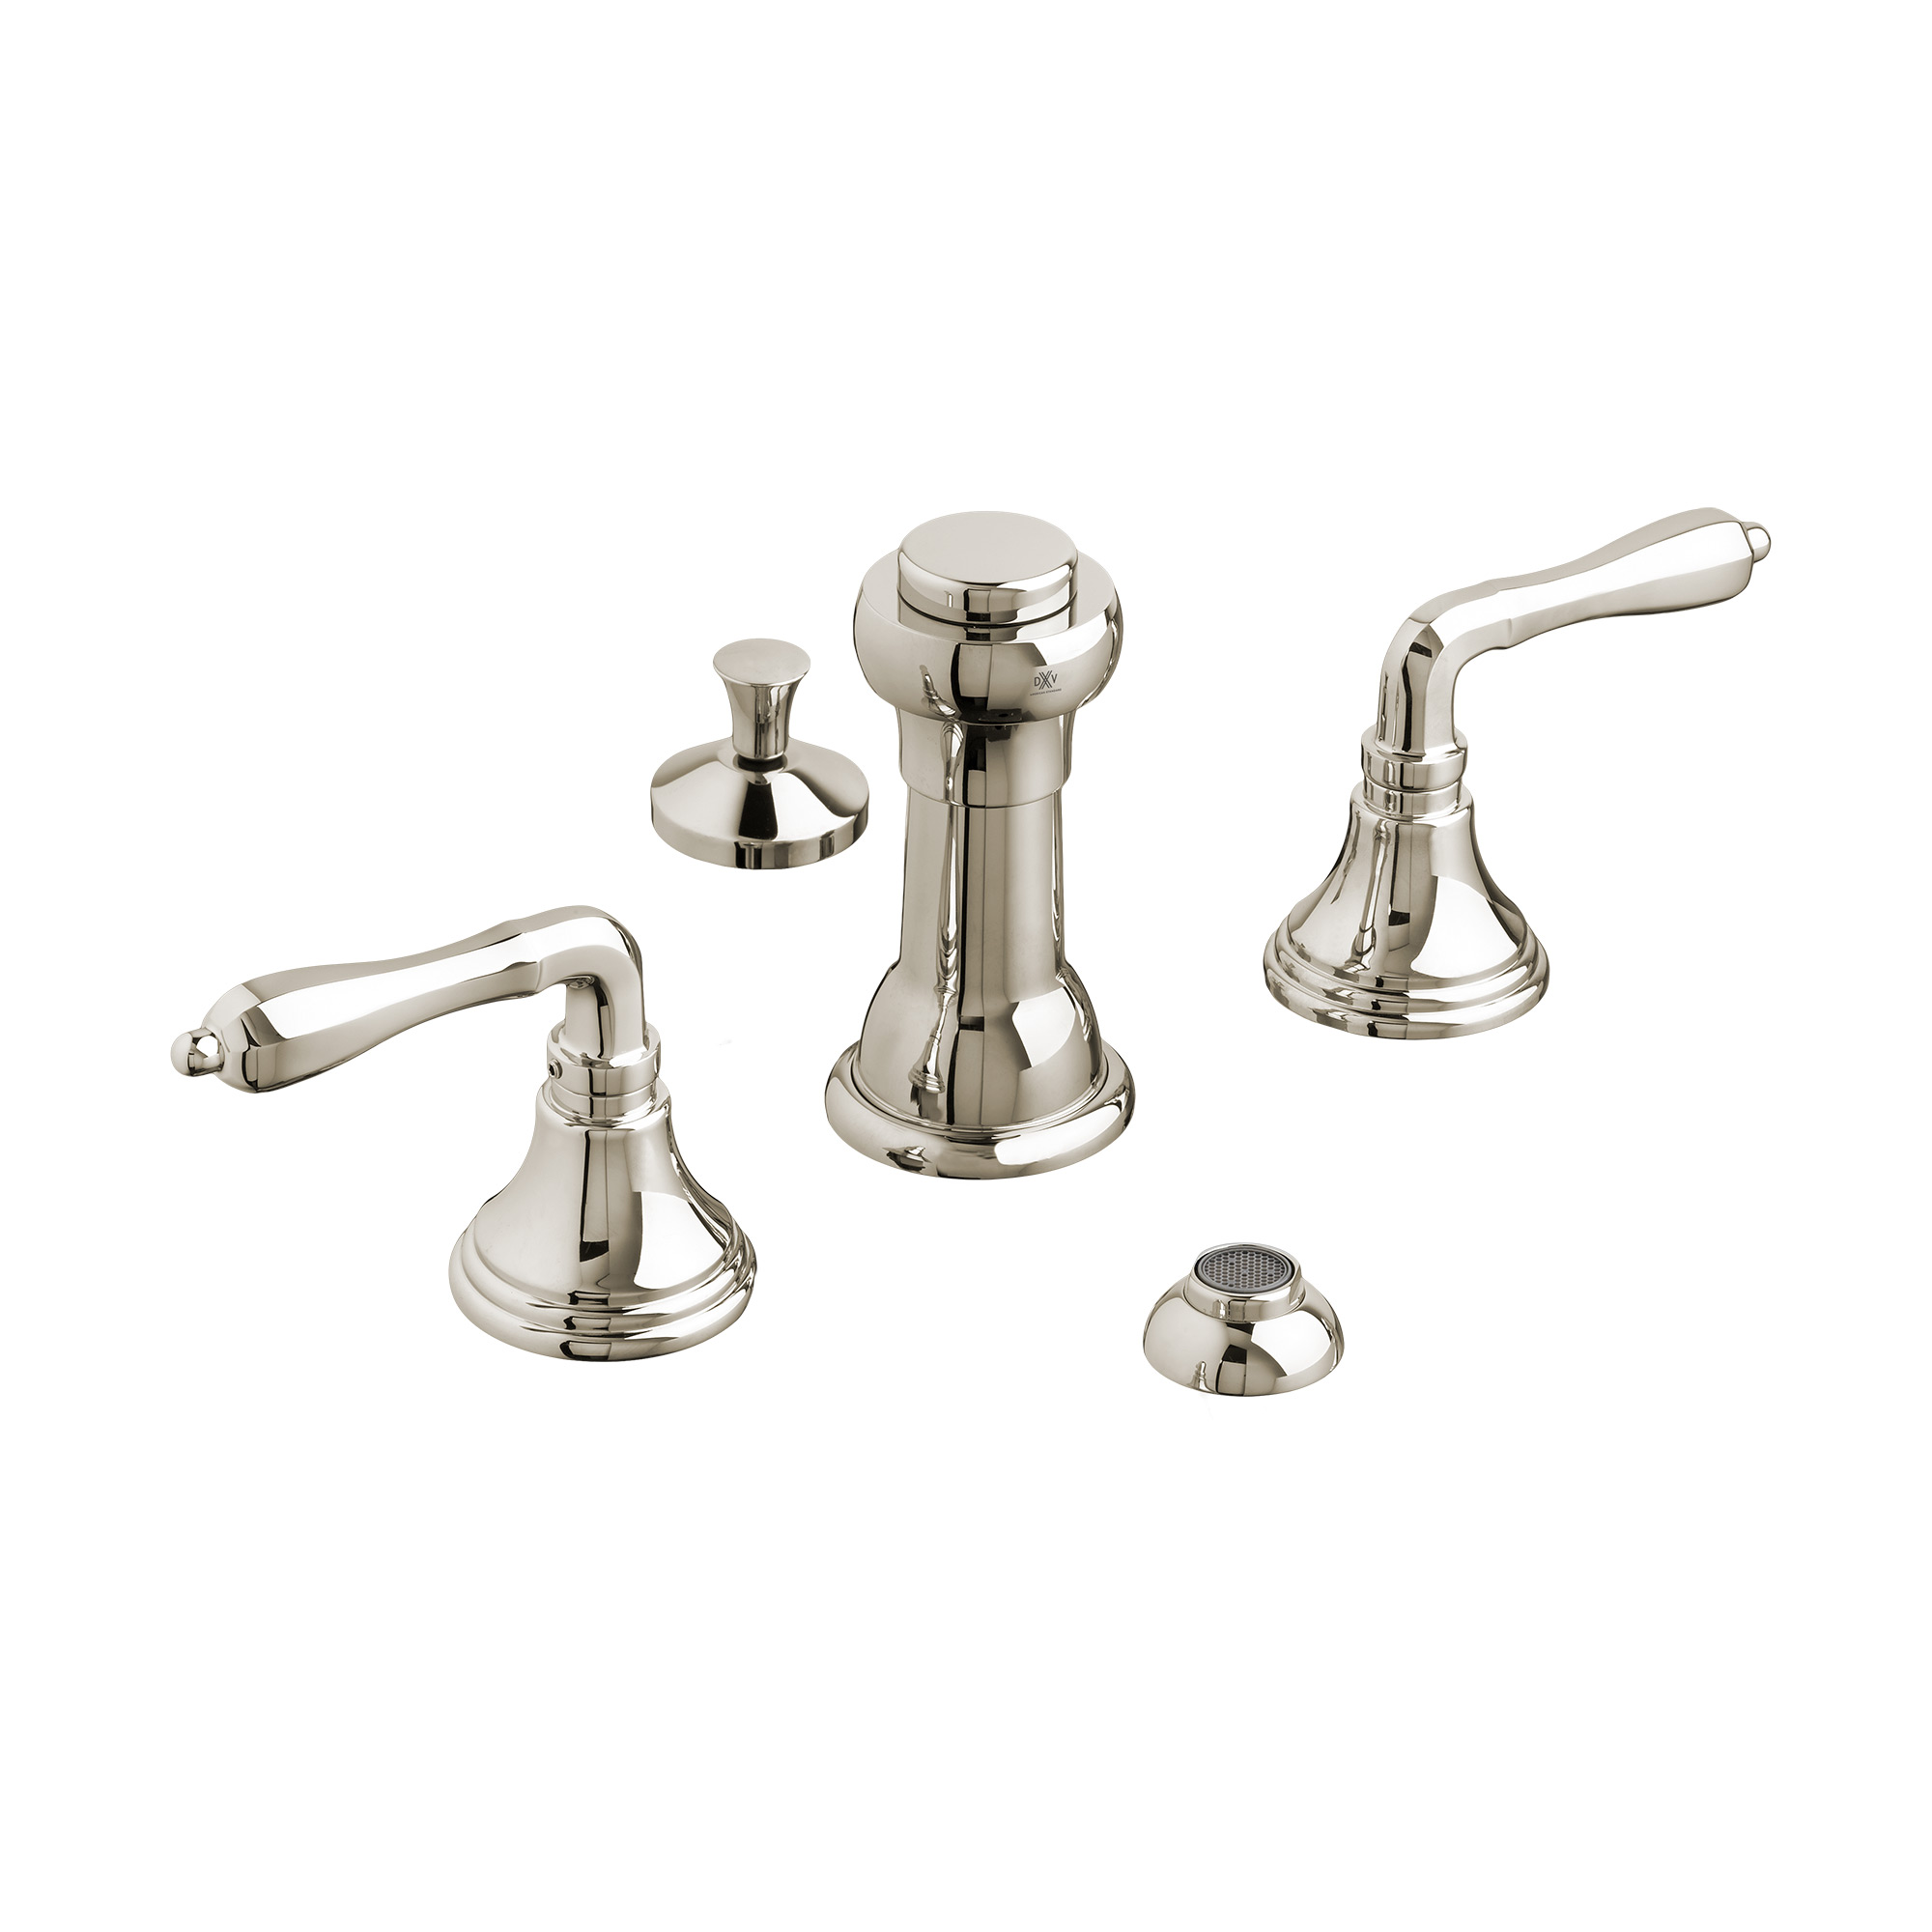 Three-Hole Bidet Faucet with Lever Handles